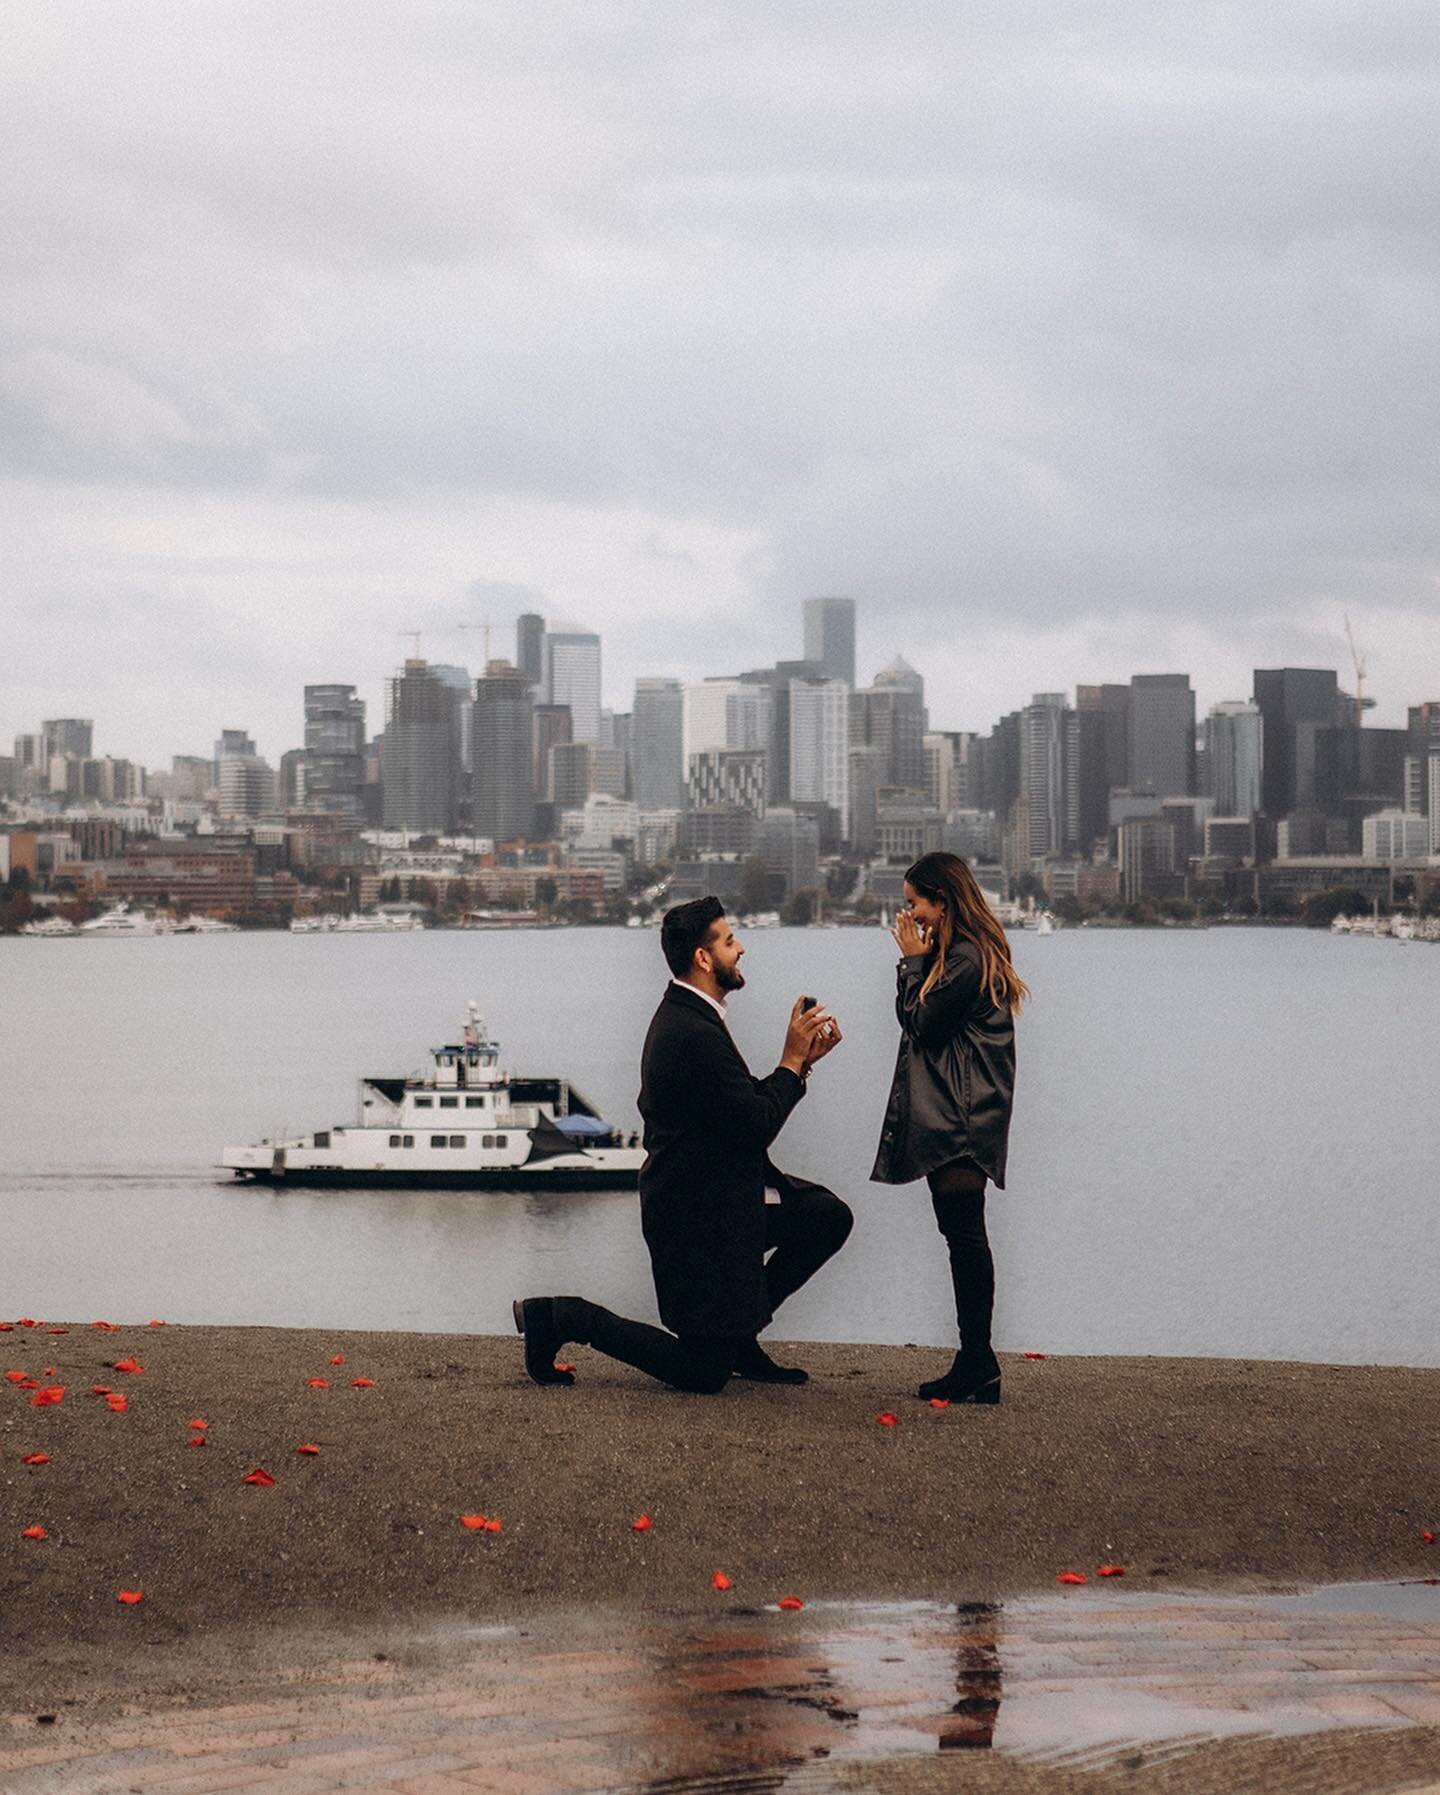 I love taking pics of surprise proposals. I've noticed I even forget to breathe while waiting for the answer. And it's only when I see the person's reaction and hear that magical 'I do' that I finally exhale😊.

A reached out to me, and I was thrille